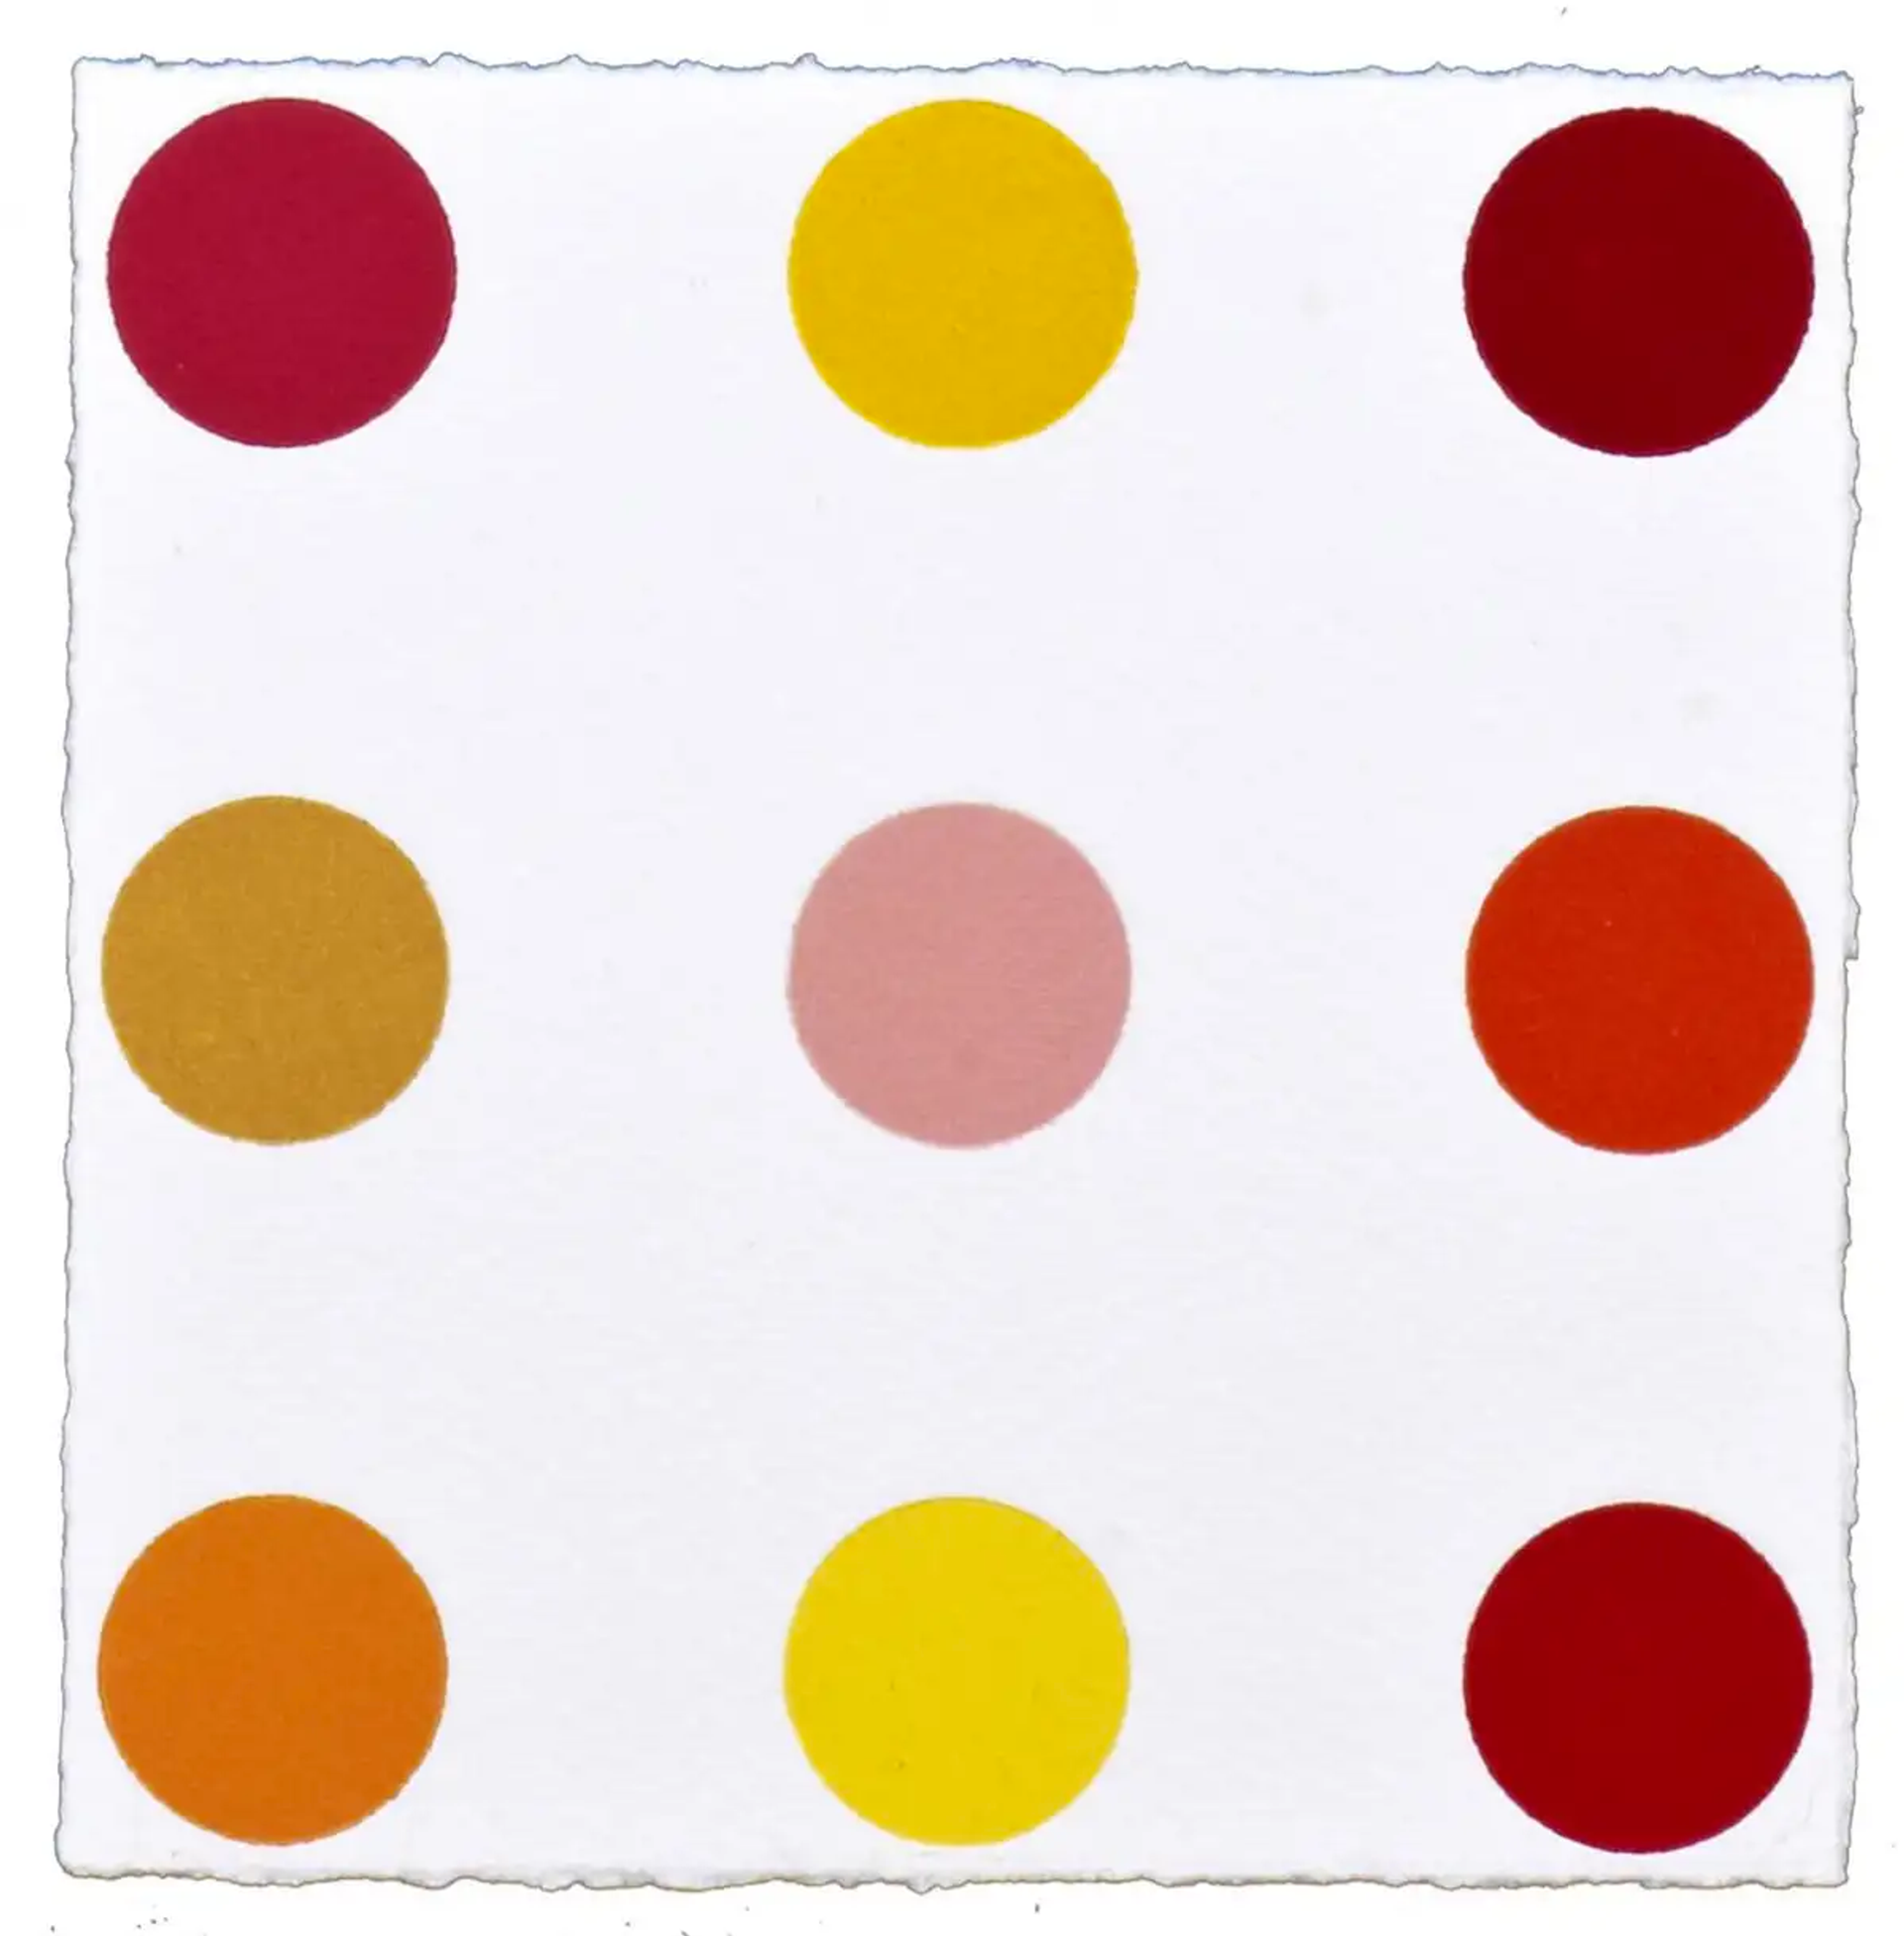 The print shows various coloured spots arranged methodically into four rows of three. Each spot is a different hue, in a warm colour palette.